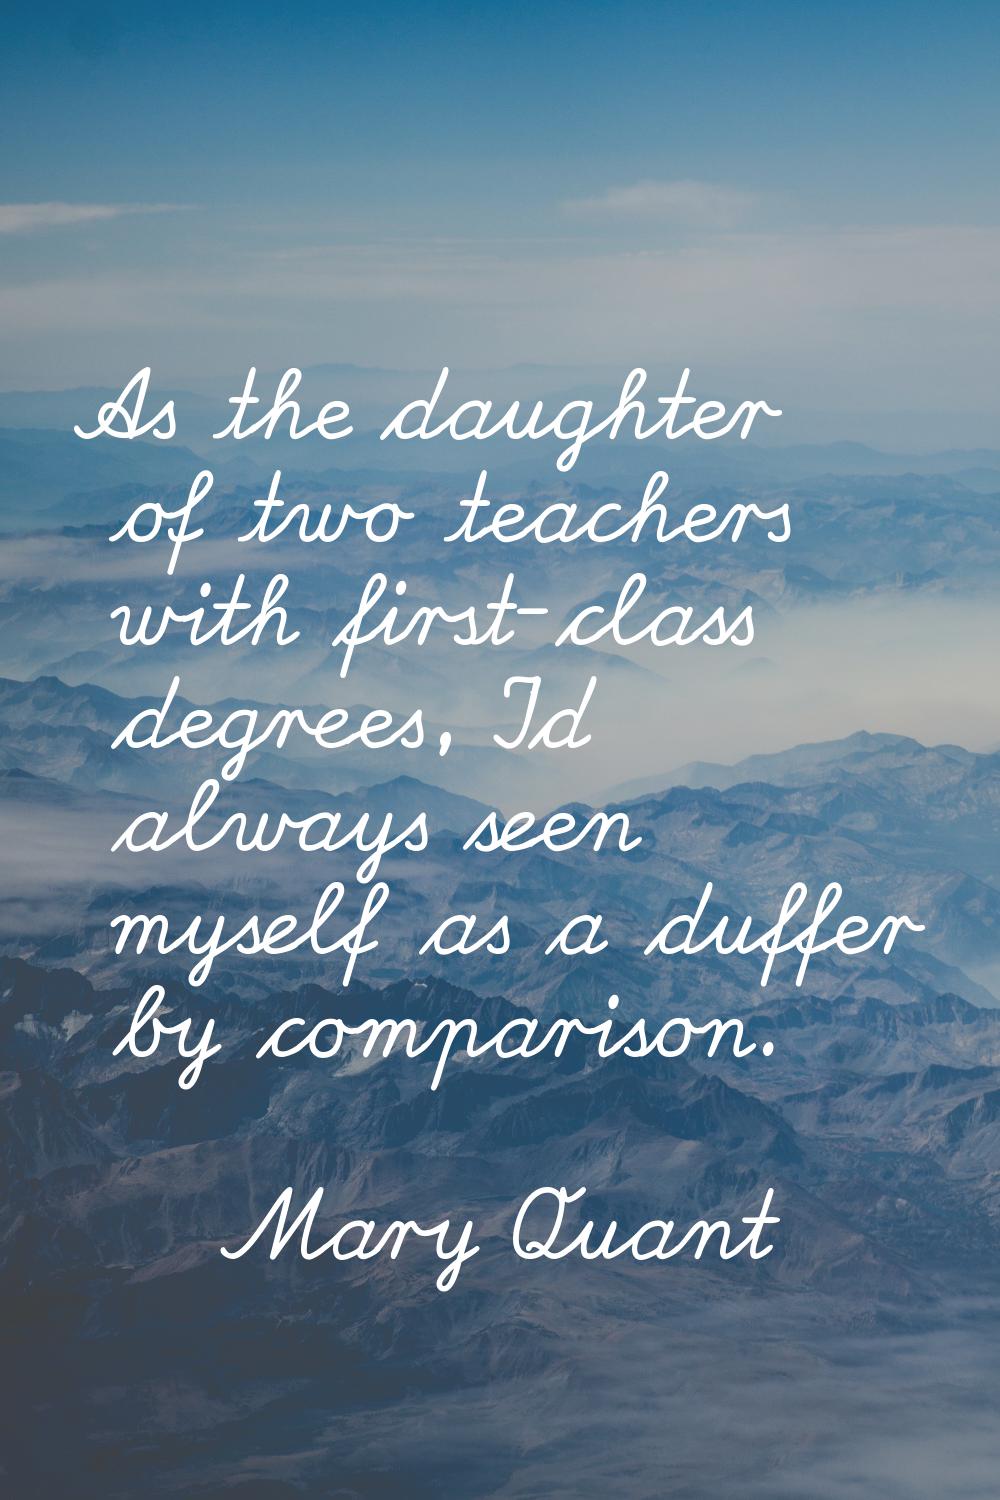 As the daughter of two teachers with first-class degrees, I'd always seen myself as a duffer by com